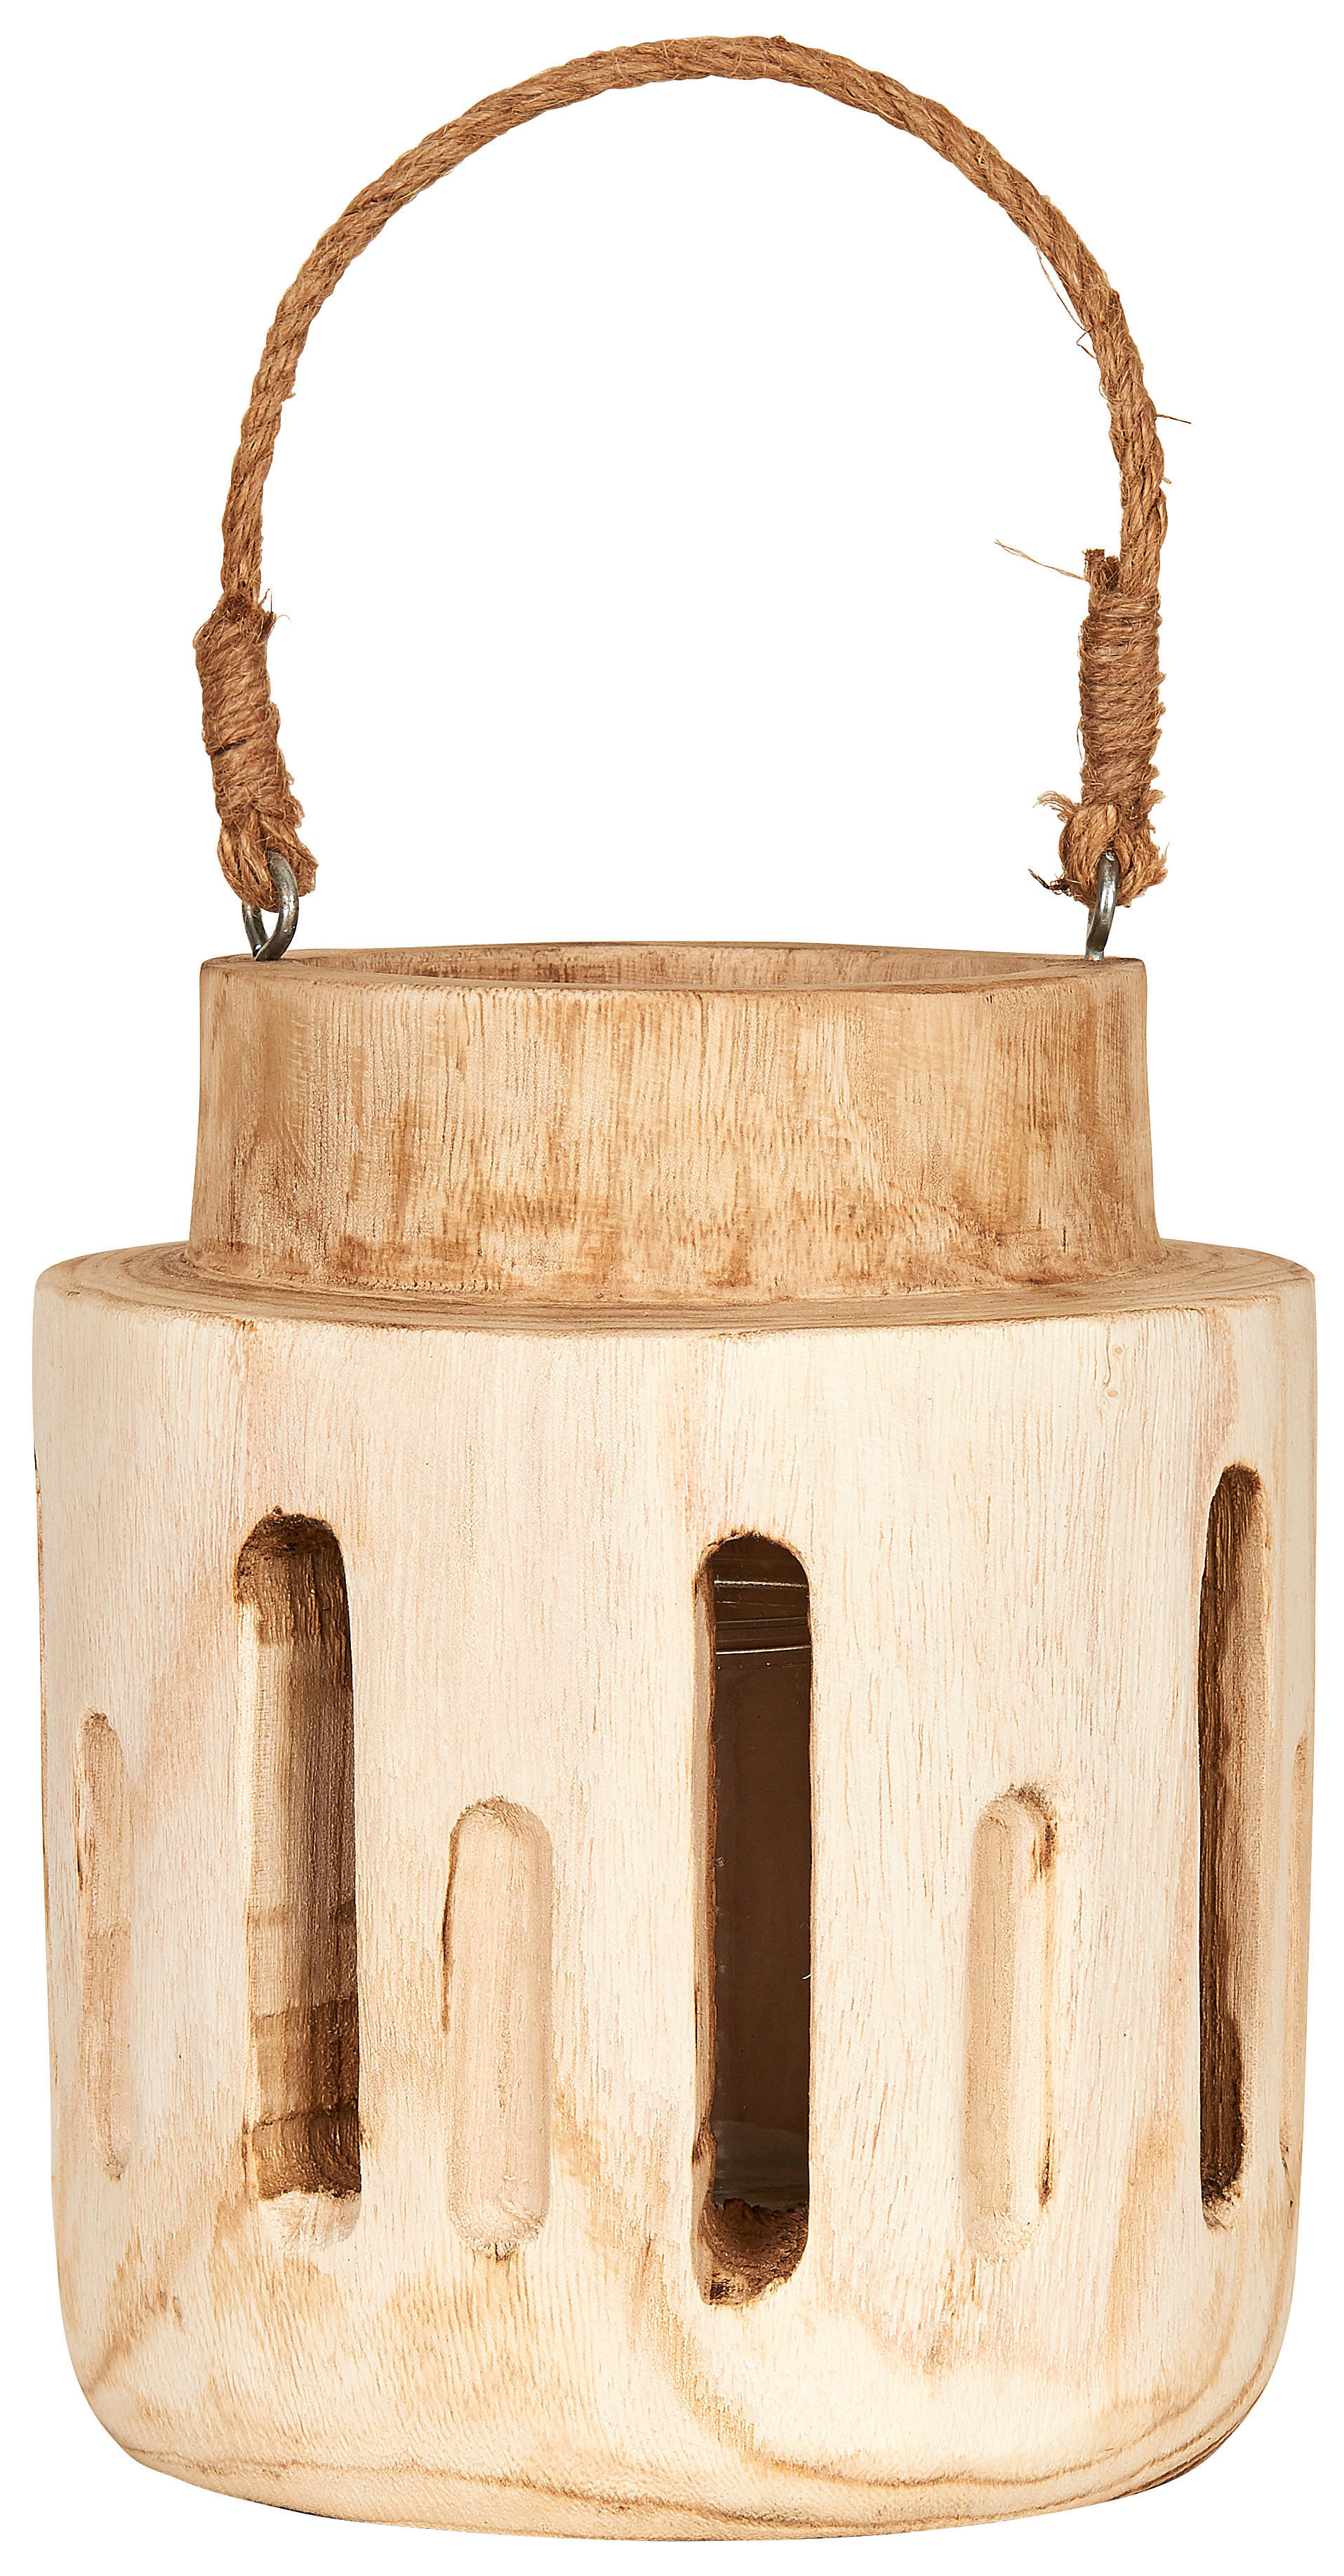 LATERNE - Braun, Natur, Glas/Holz (20/23cm) - Ambia Home